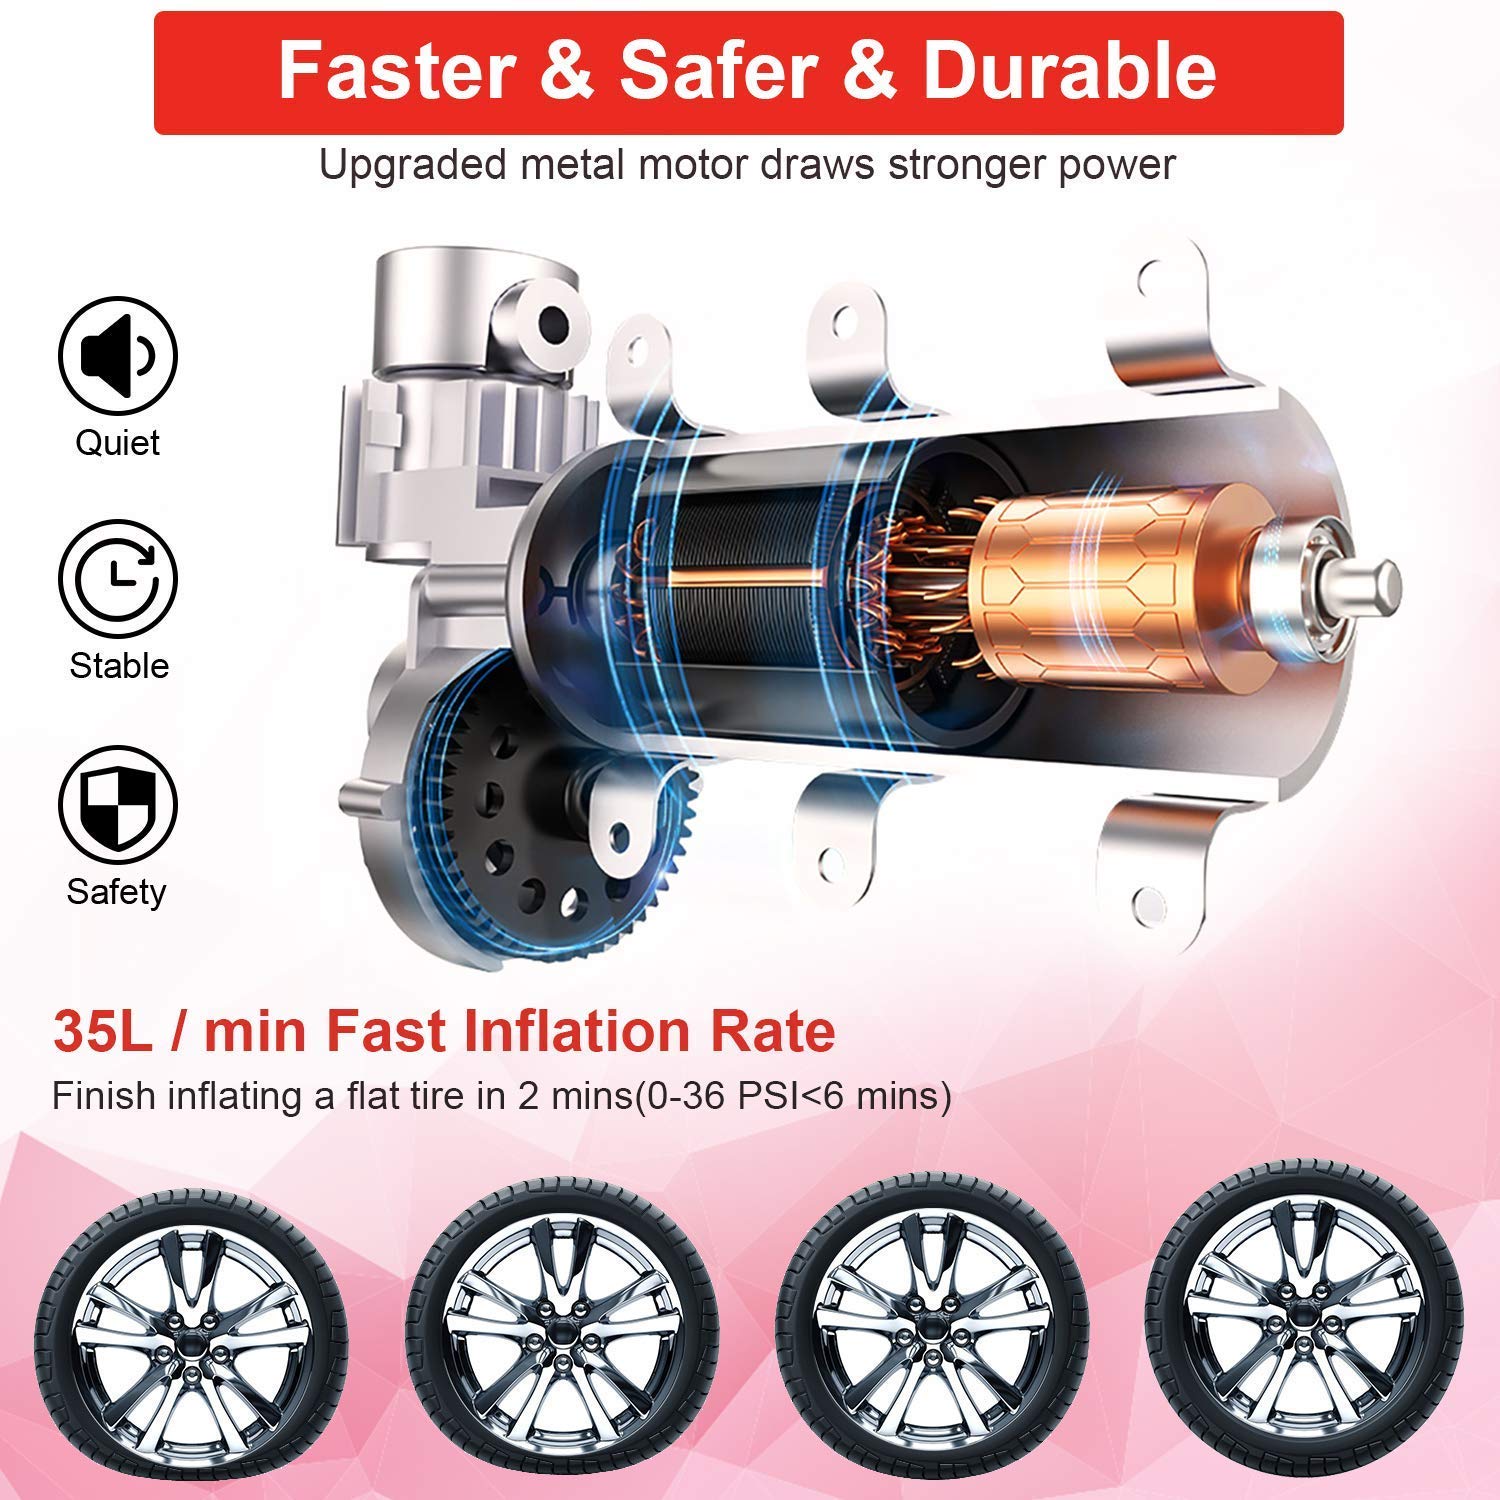 Air Leaking From Tireportable 150psi Air Compressor For Car